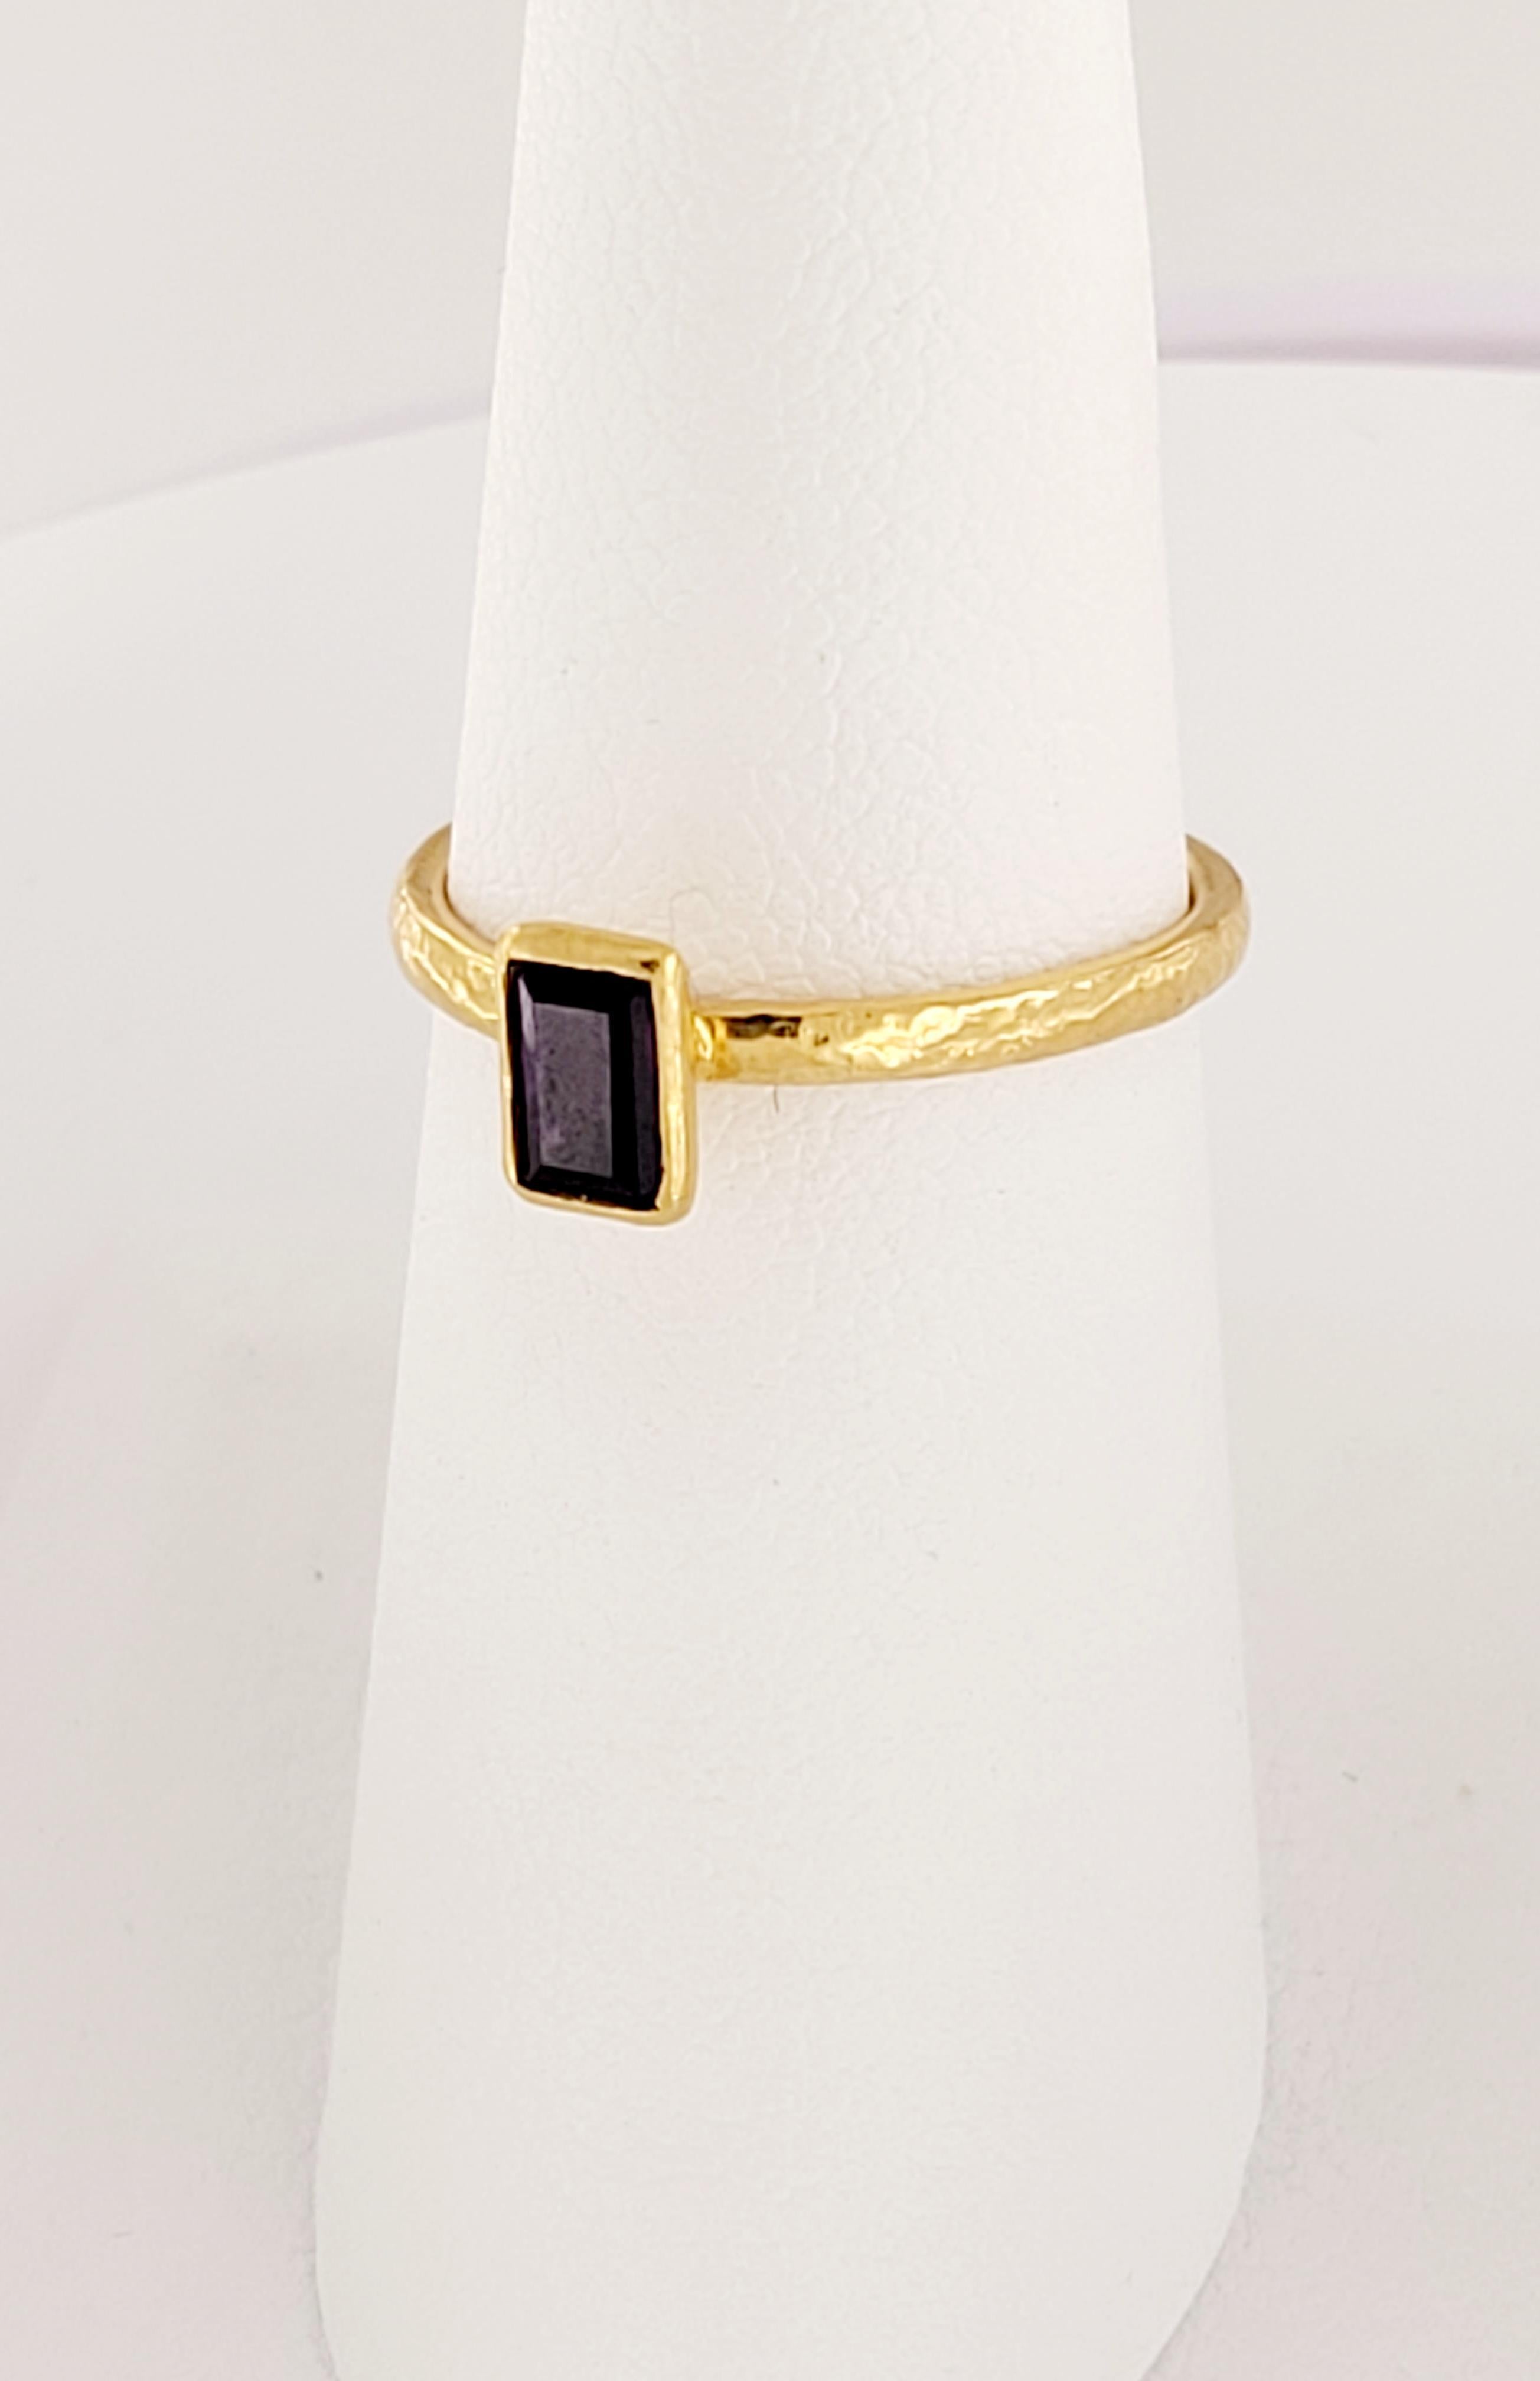 Emerald Cut Designed by famous Gurhan, Amethyst Ring Set in 24K Yellow Gold Size 6.25 For Sale